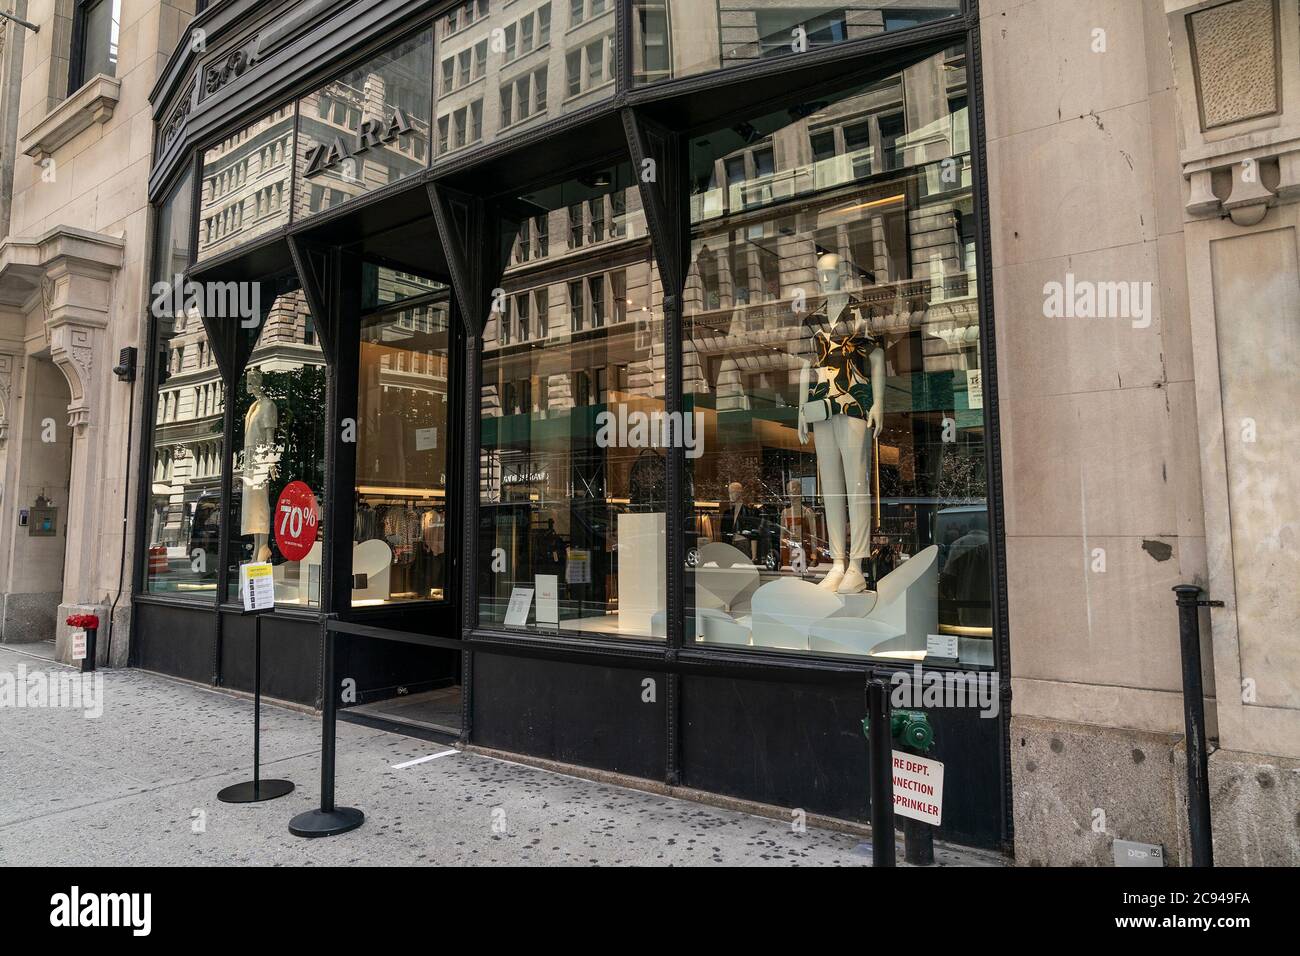 New York, United States. 28th July, 2020. View of Zara store on 5th Avenue,  Manhattan. Inditex, owner of brand plans to close more than 1000 stores  around the world. Company announced that